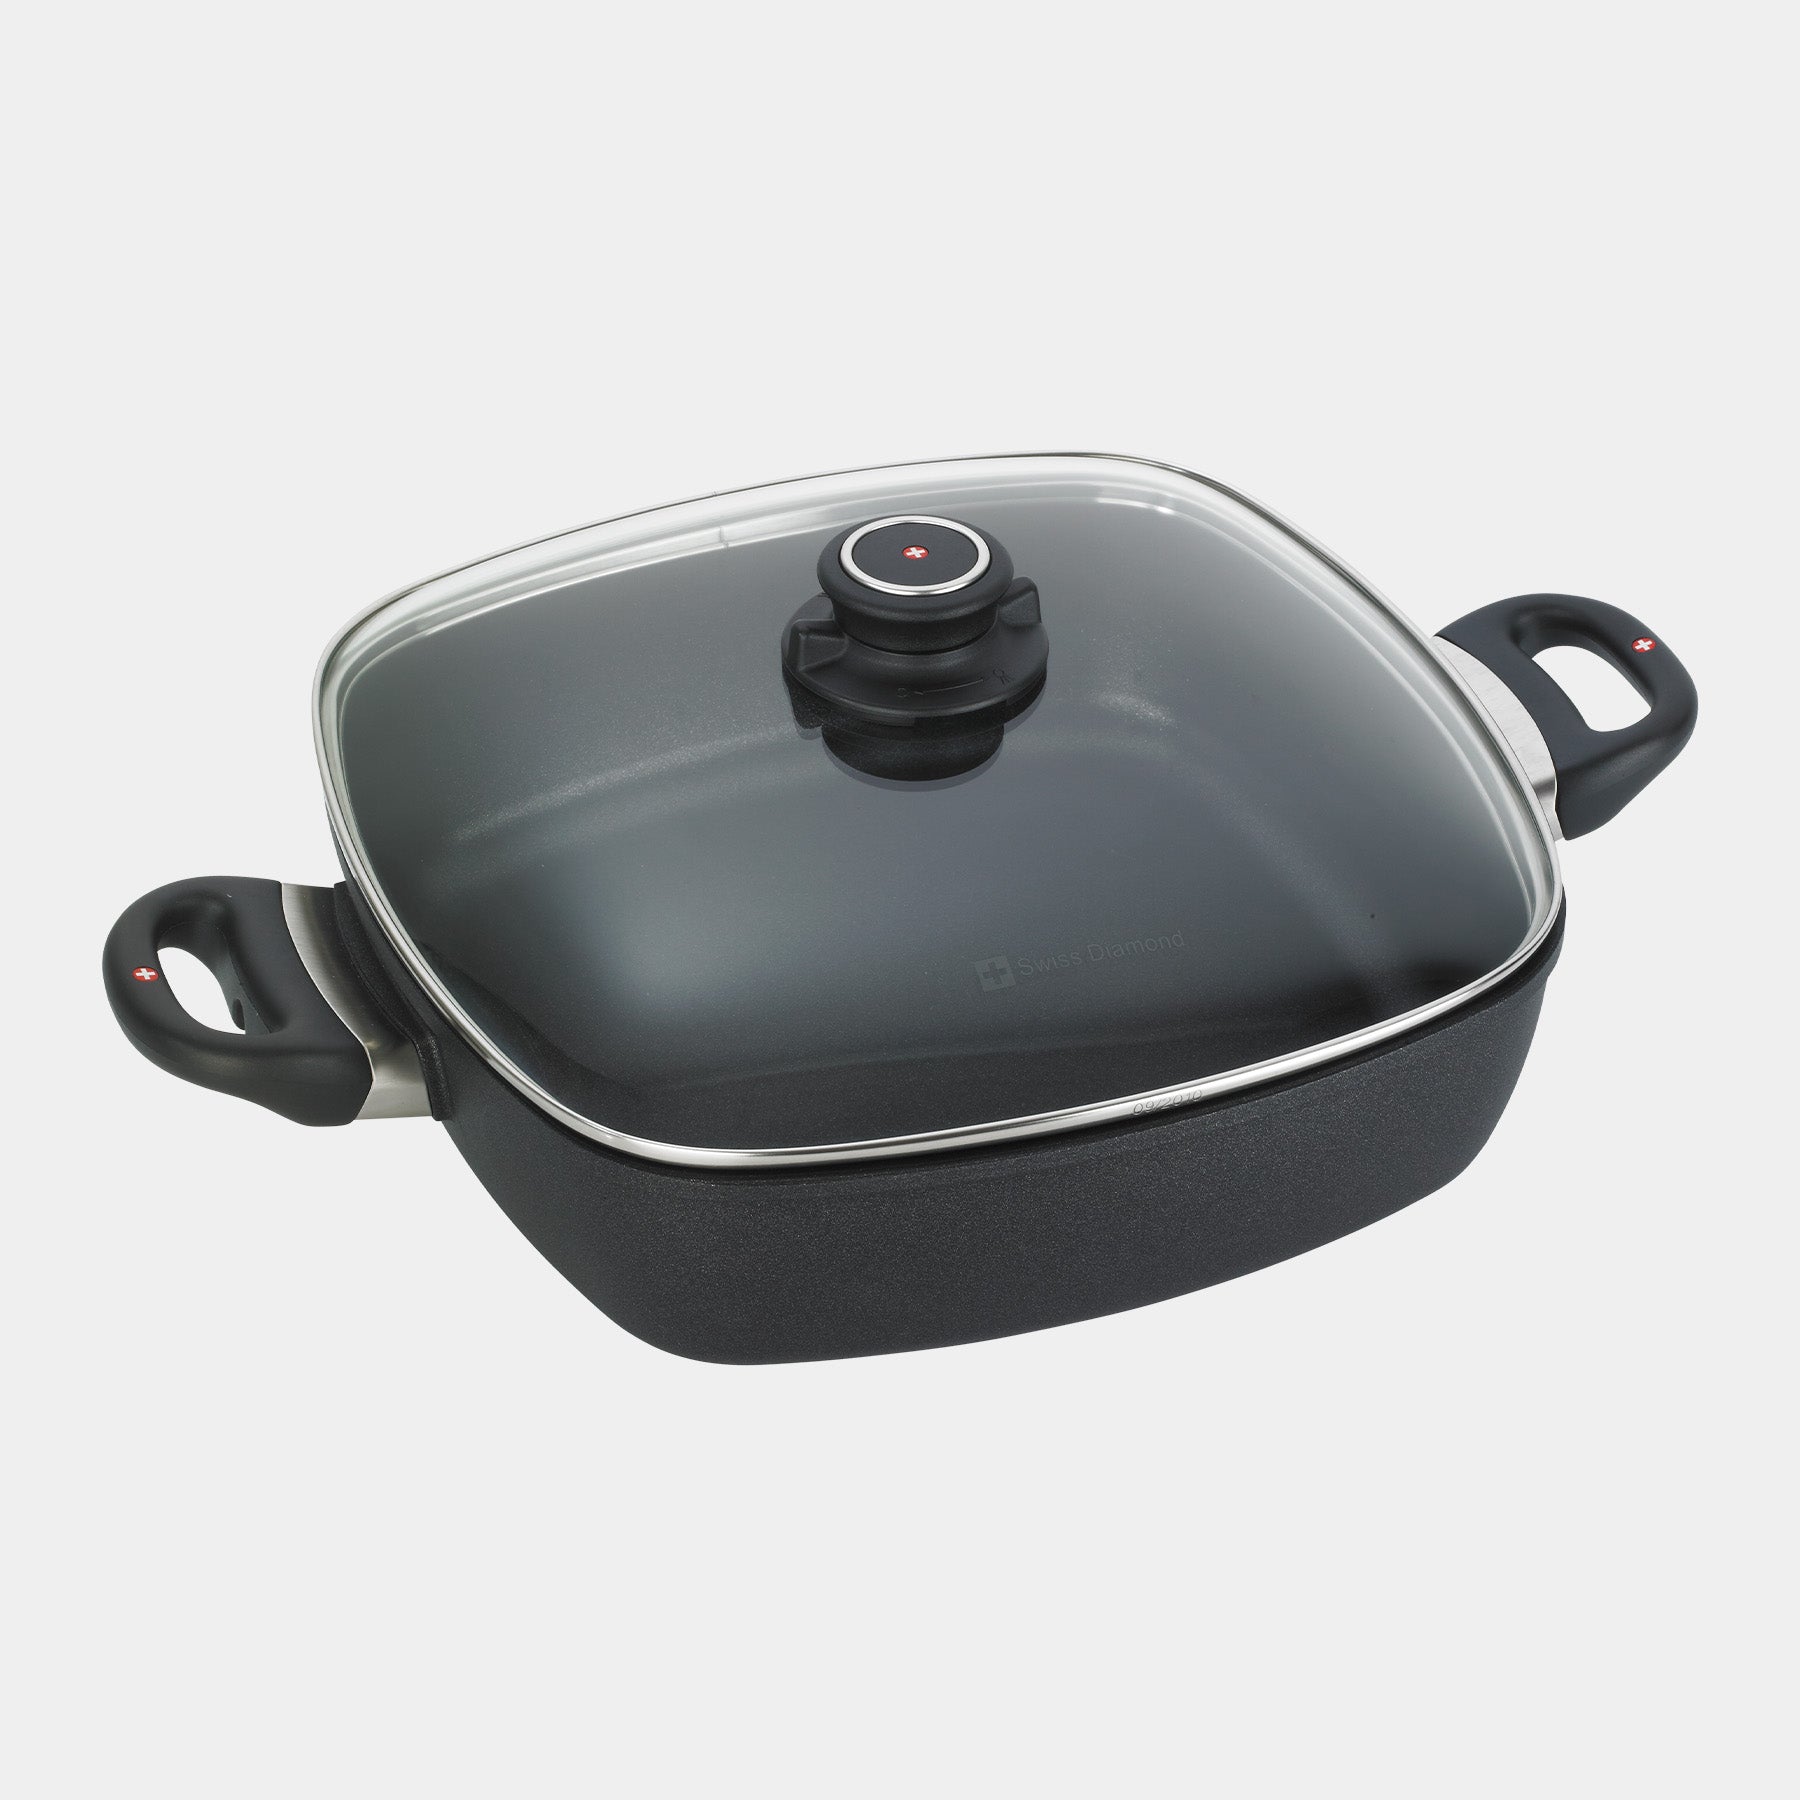 XD Nonstick 5 qt Square Casserole with Glass Lid - Induction Top View